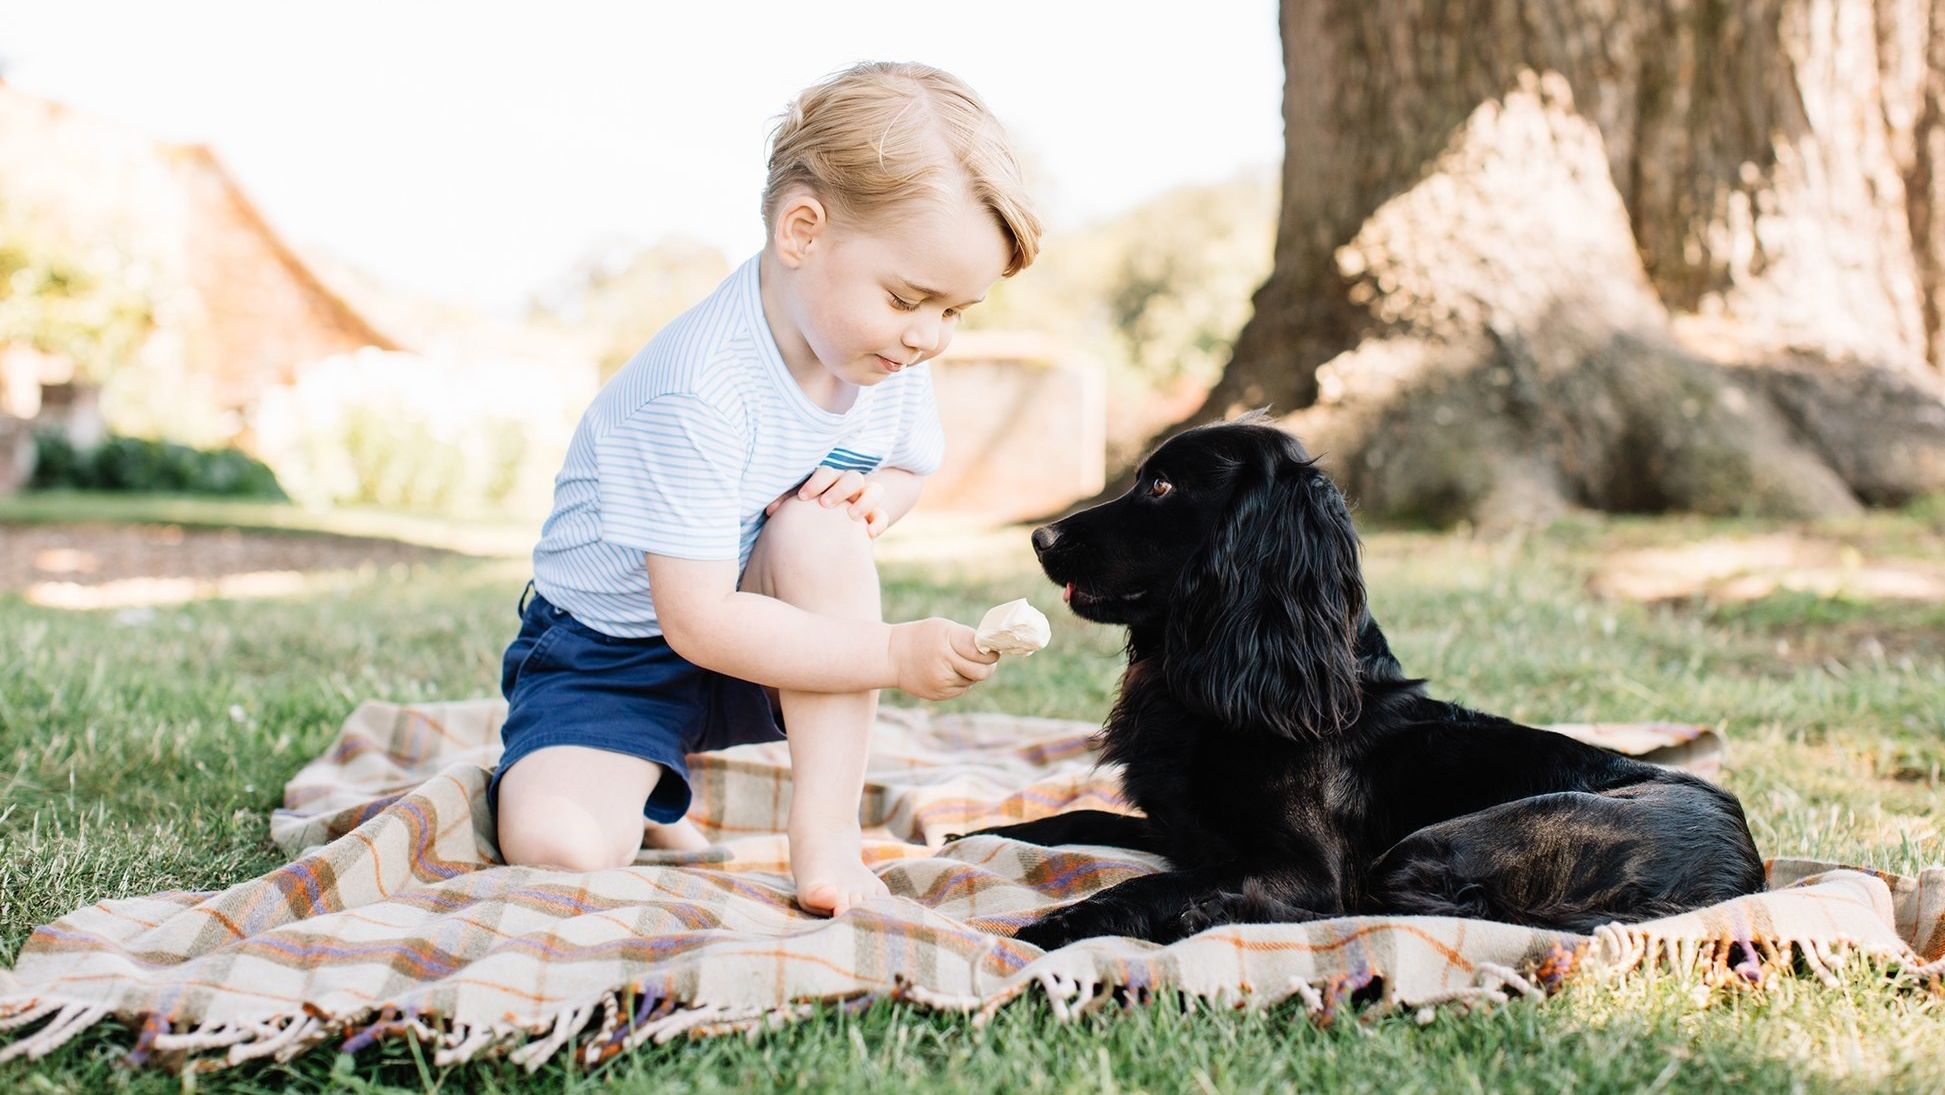 William and Catherine released new photos of Prince George to mark his third birthday in July 2016. Here he plays with the family's pet dog, Lupo.